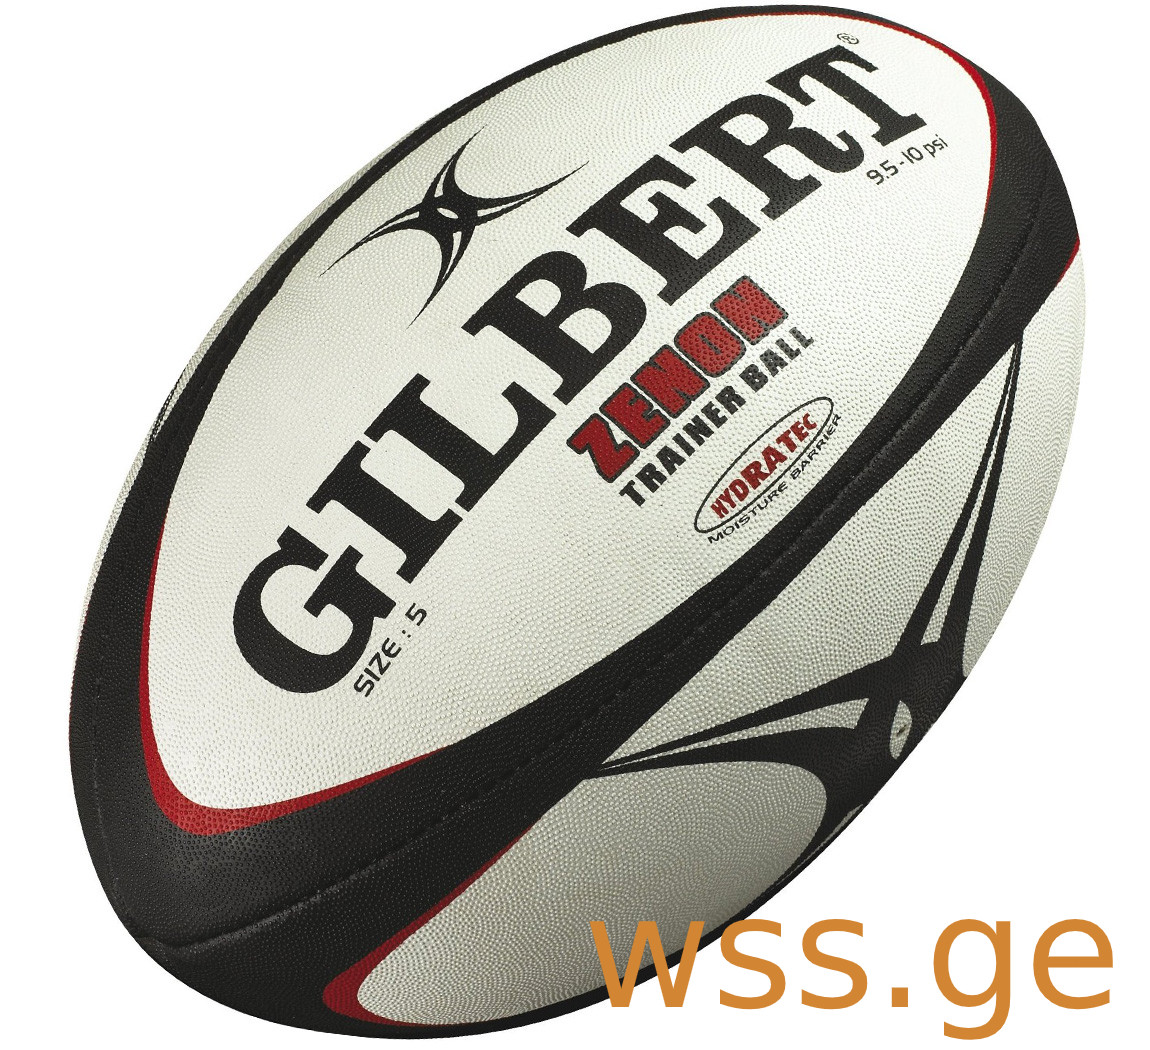 Gilber Zenon rugby ball size 5.jpeg